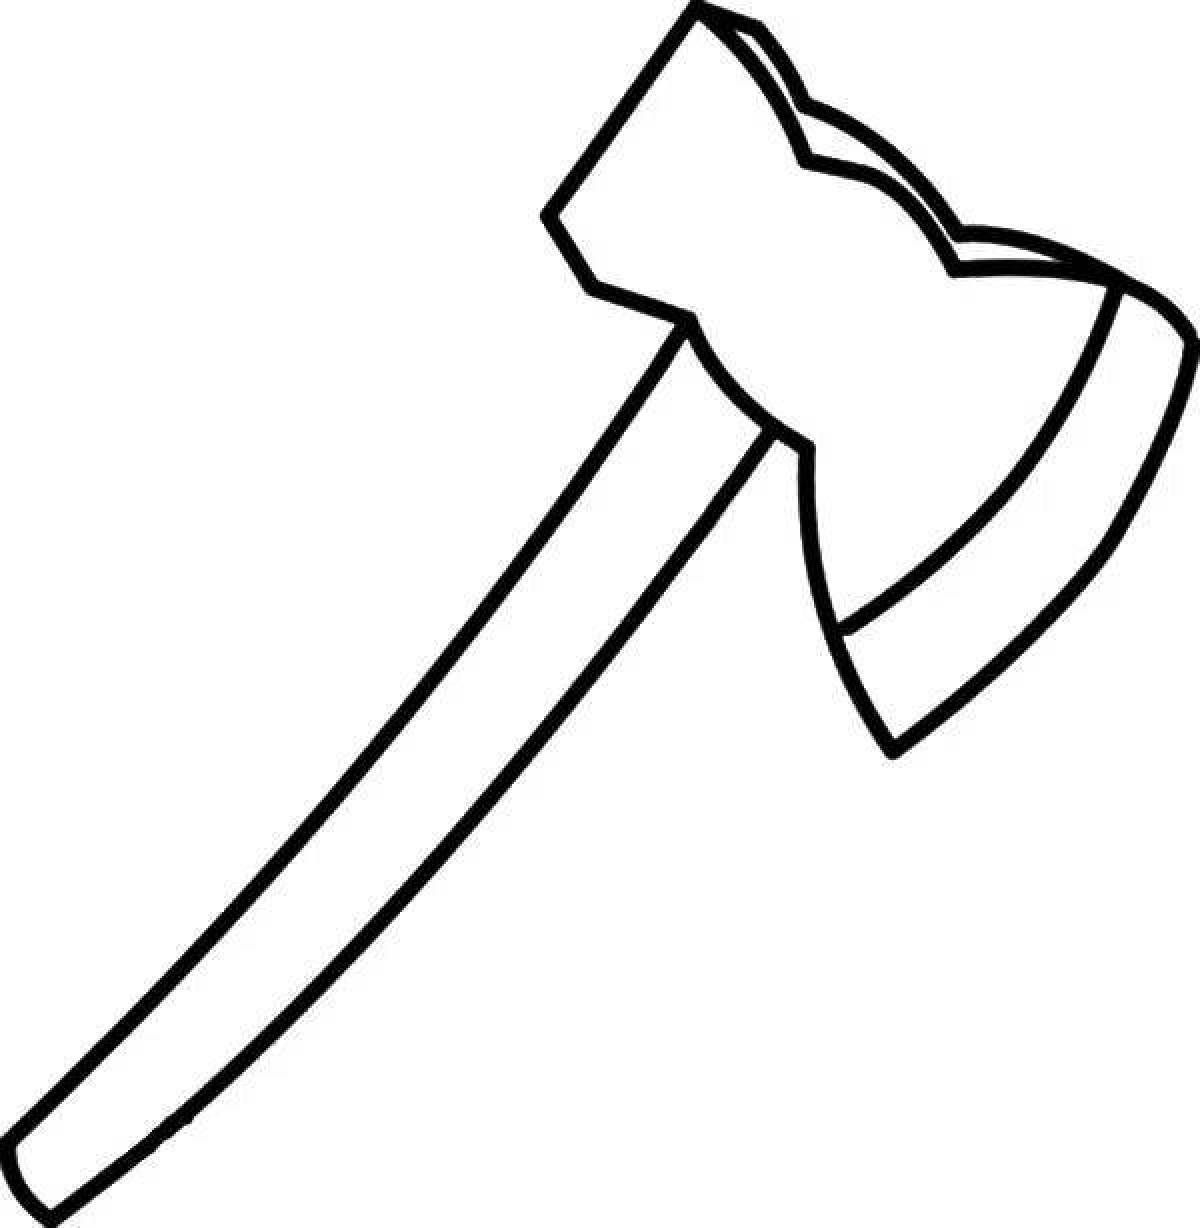 Attractive ax coloring page for toddlers